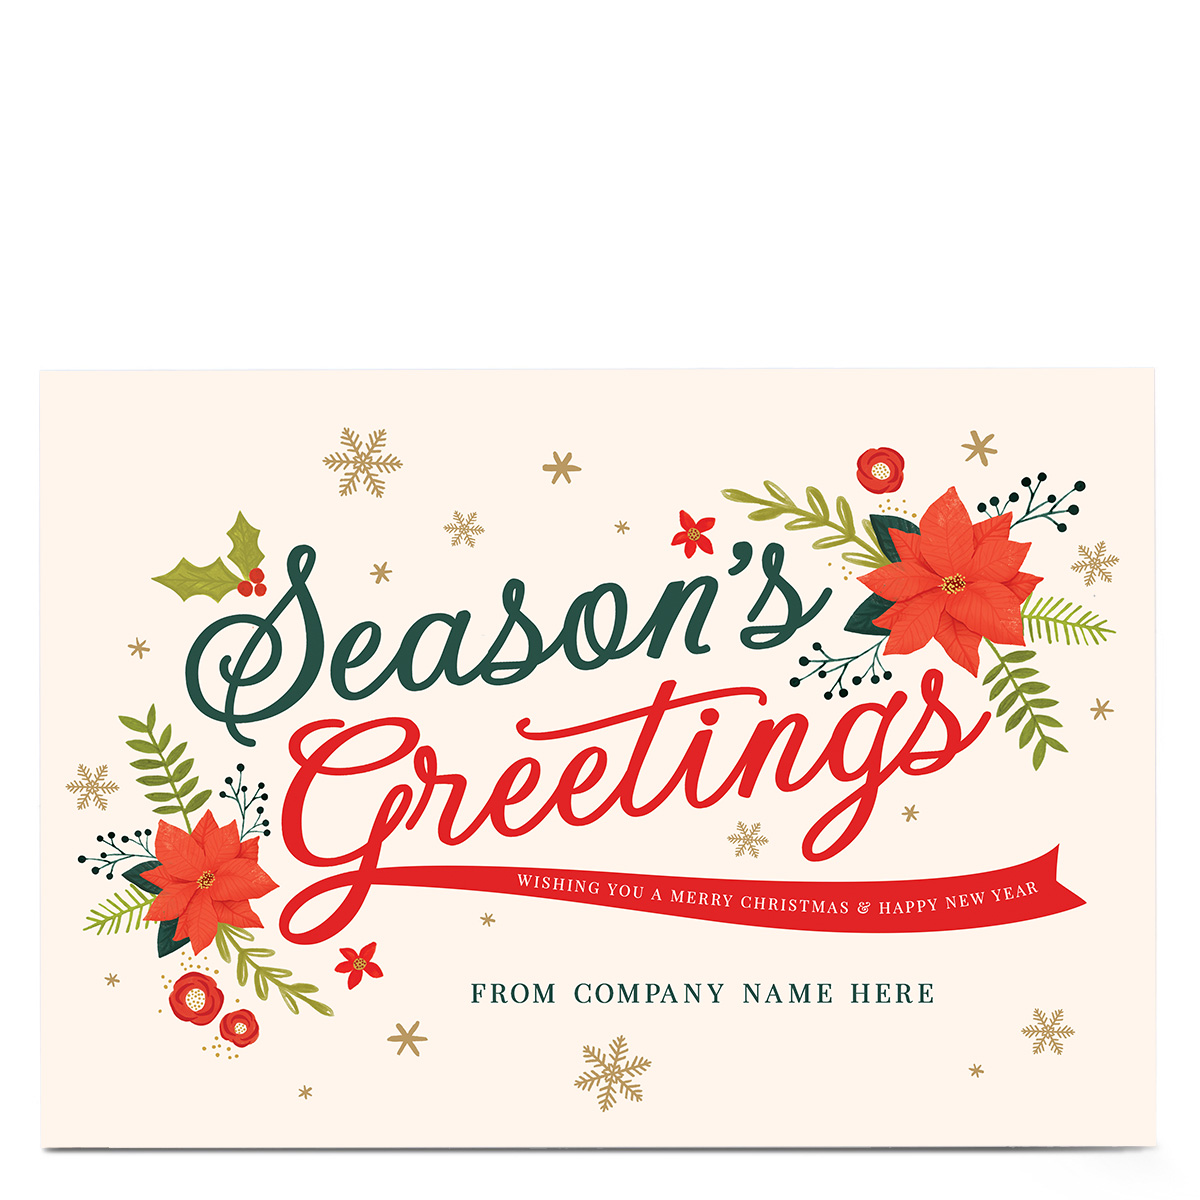 Personalised Christmas Card - Season's Greetings From Your Company